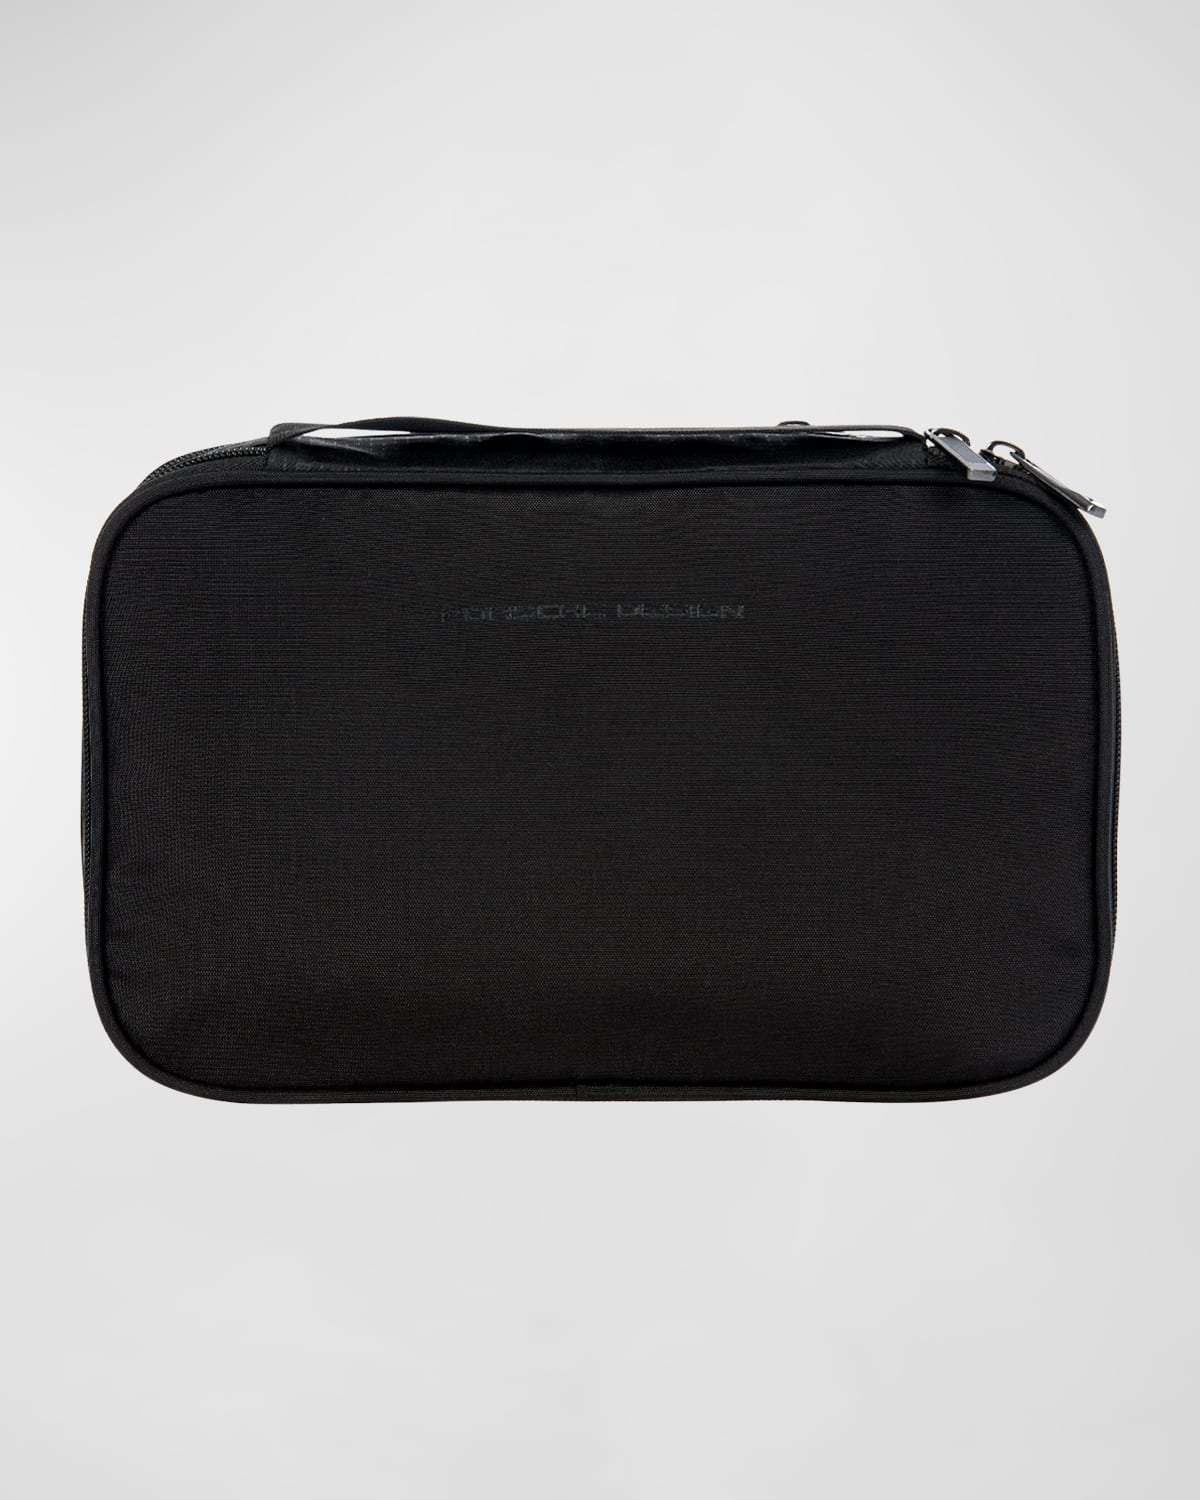 Porsche Design Roadster Small Packing Cube In Black